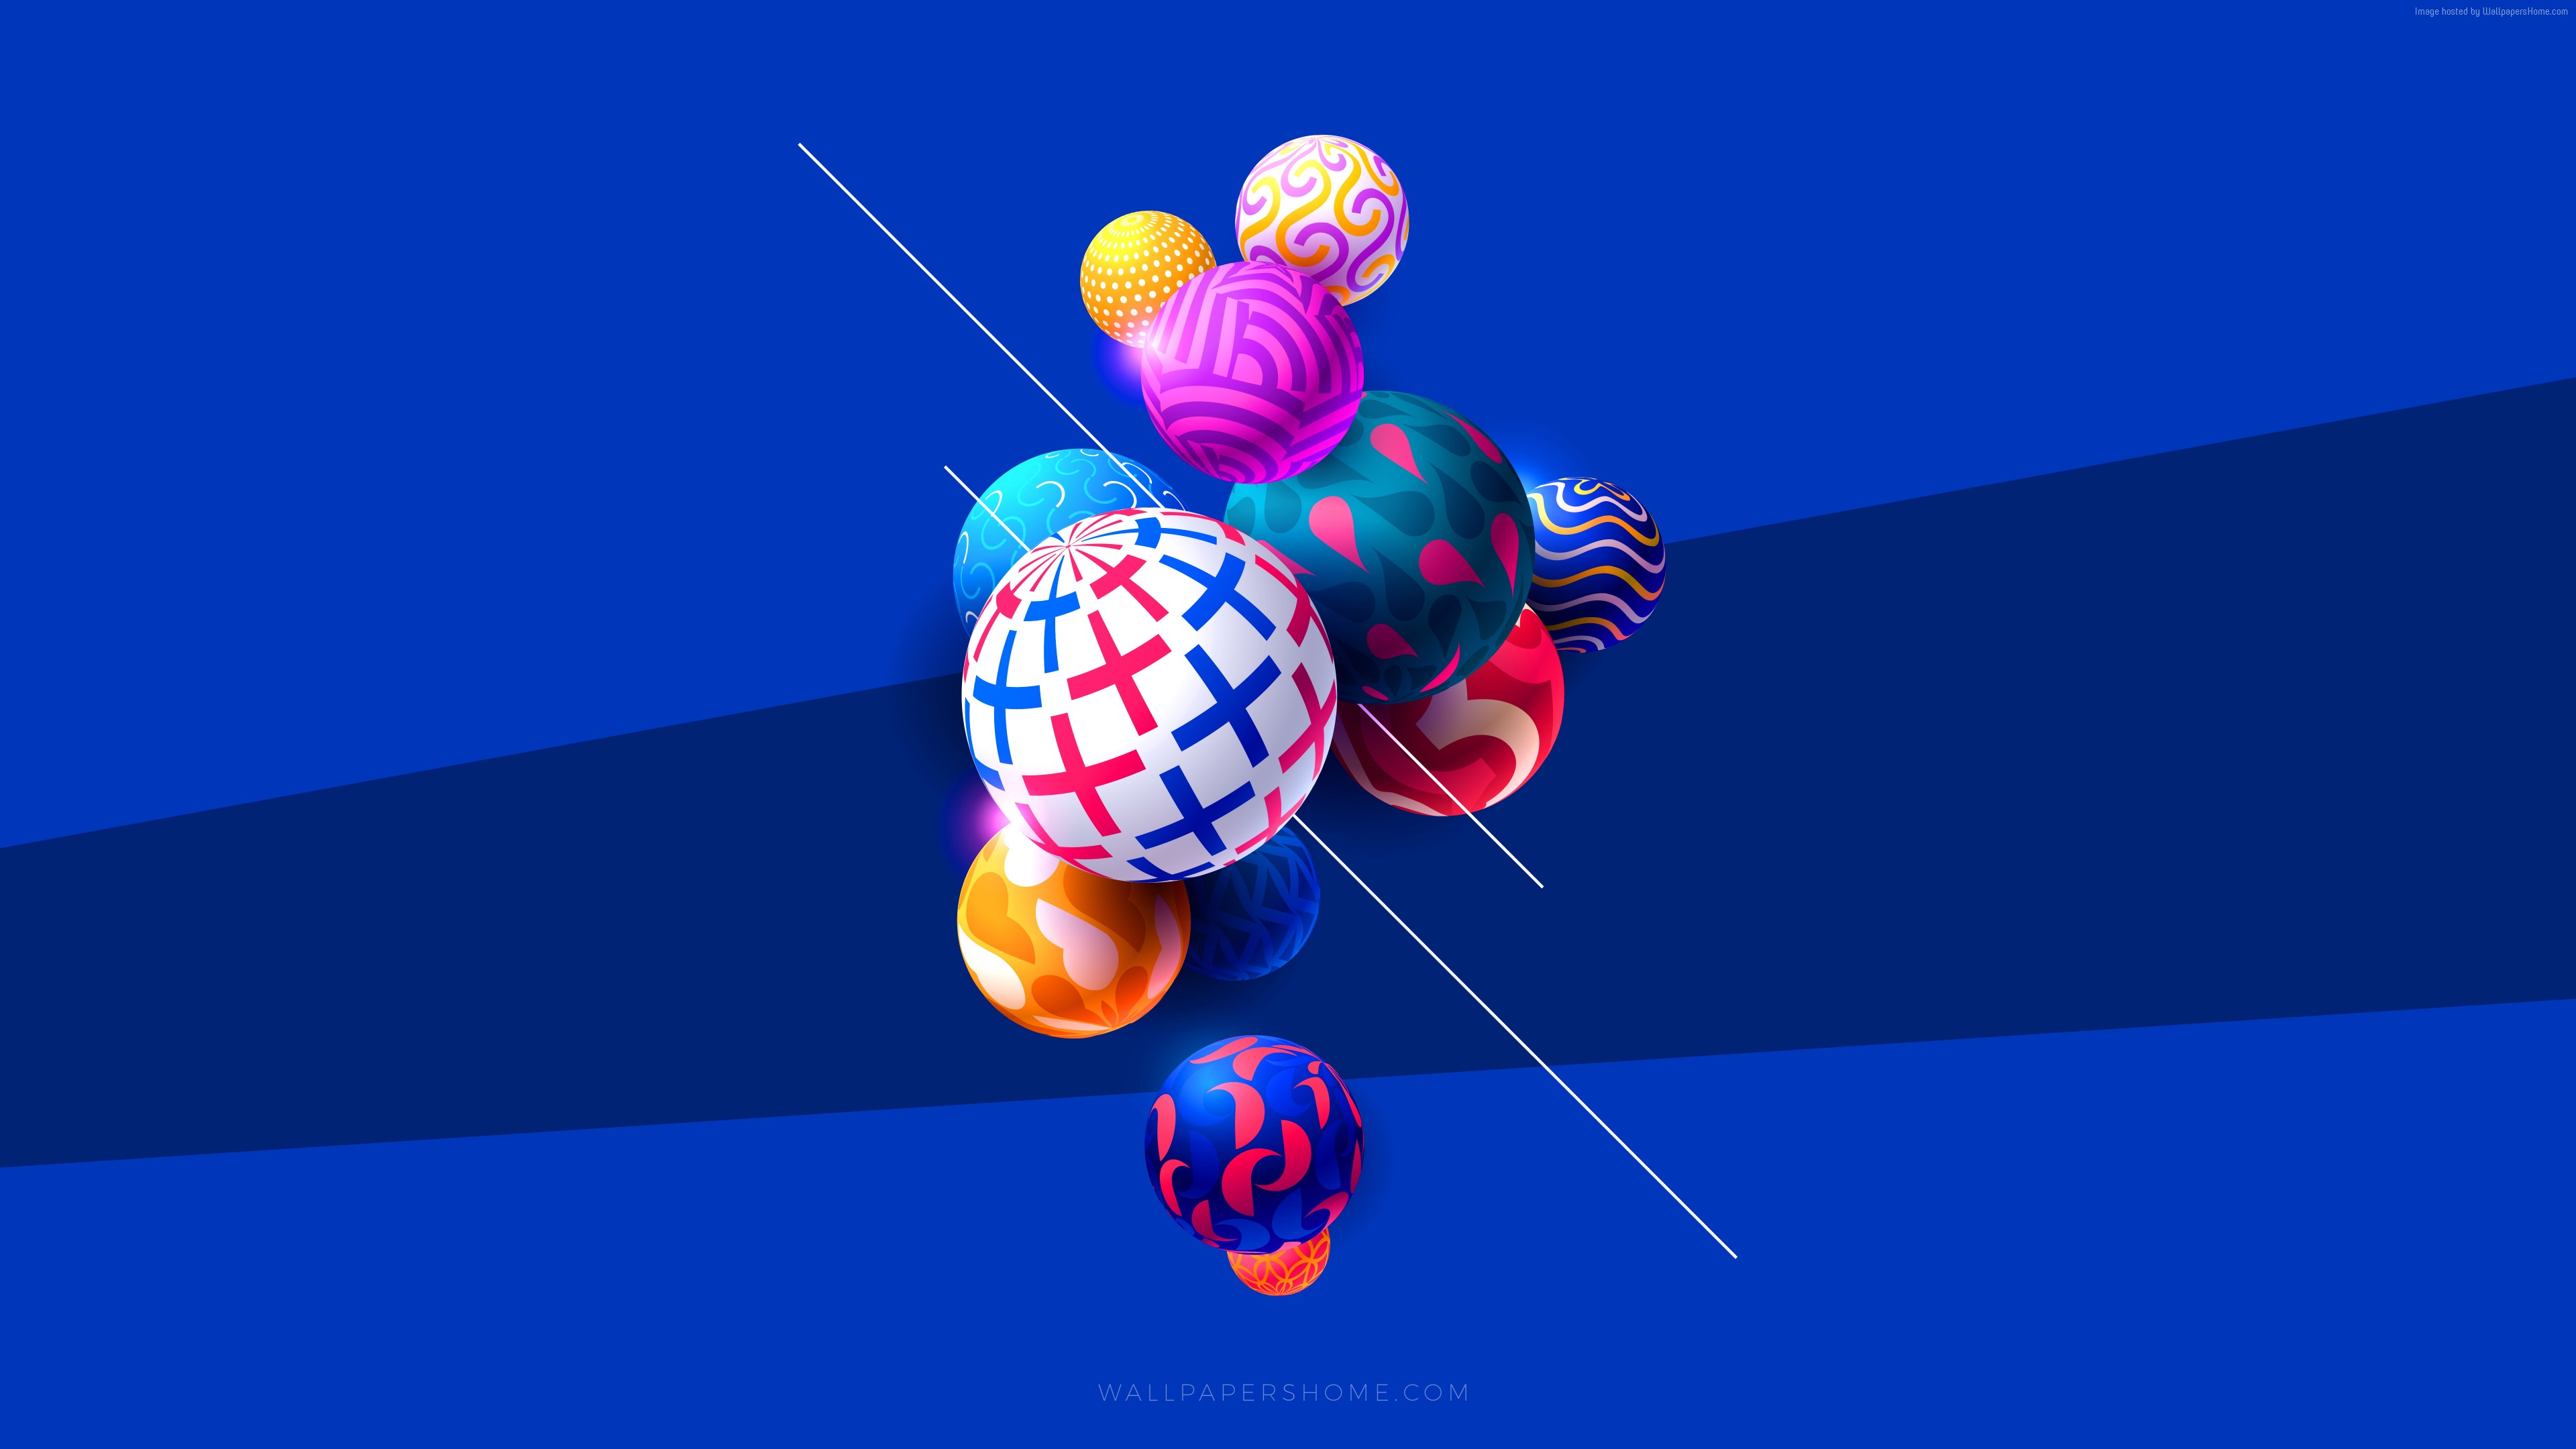 8k wallpaper,electric blue,recreation,fictional character,graphic design,balloon